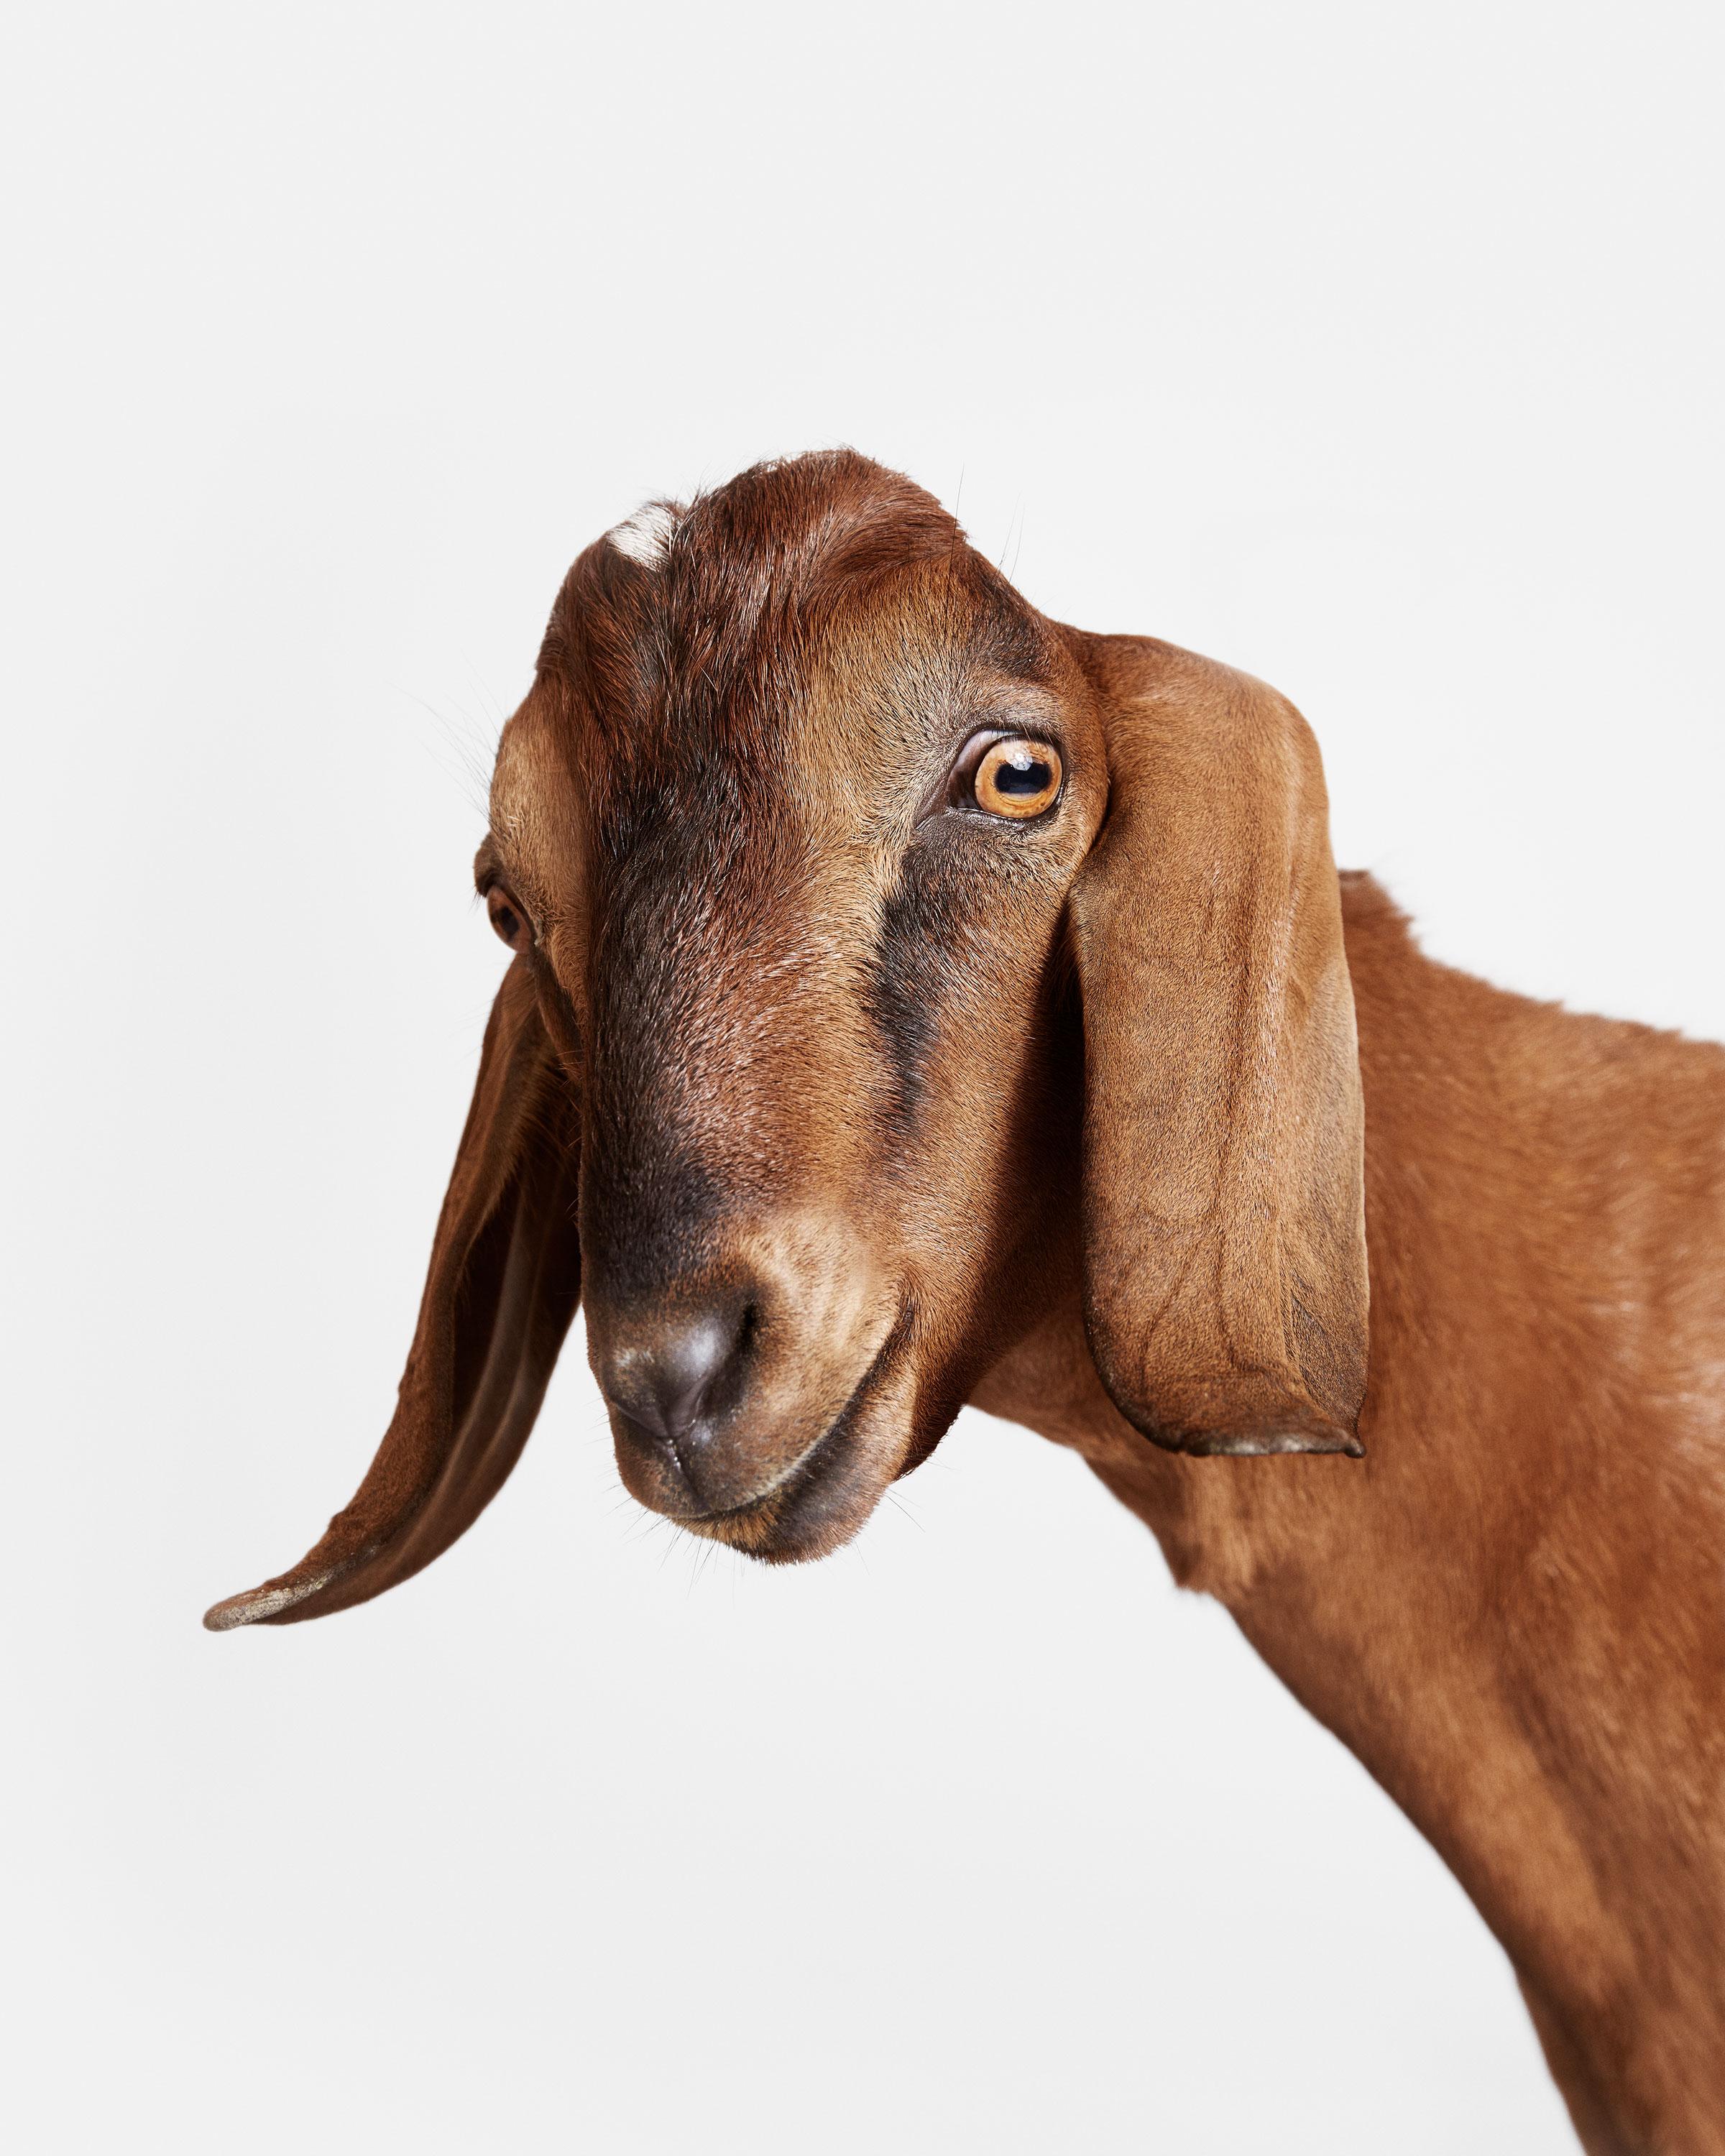 Available Sizes:
37.5" x 30" Edition of 15
50" x 40" Edition of 10
60" x 48" Edition of 5

Sammy: Sammy waltzed into the shoot ready for attention.  He wanted goat treats and a scratch behind the ears from everyone.  While on set, it seemed clear to